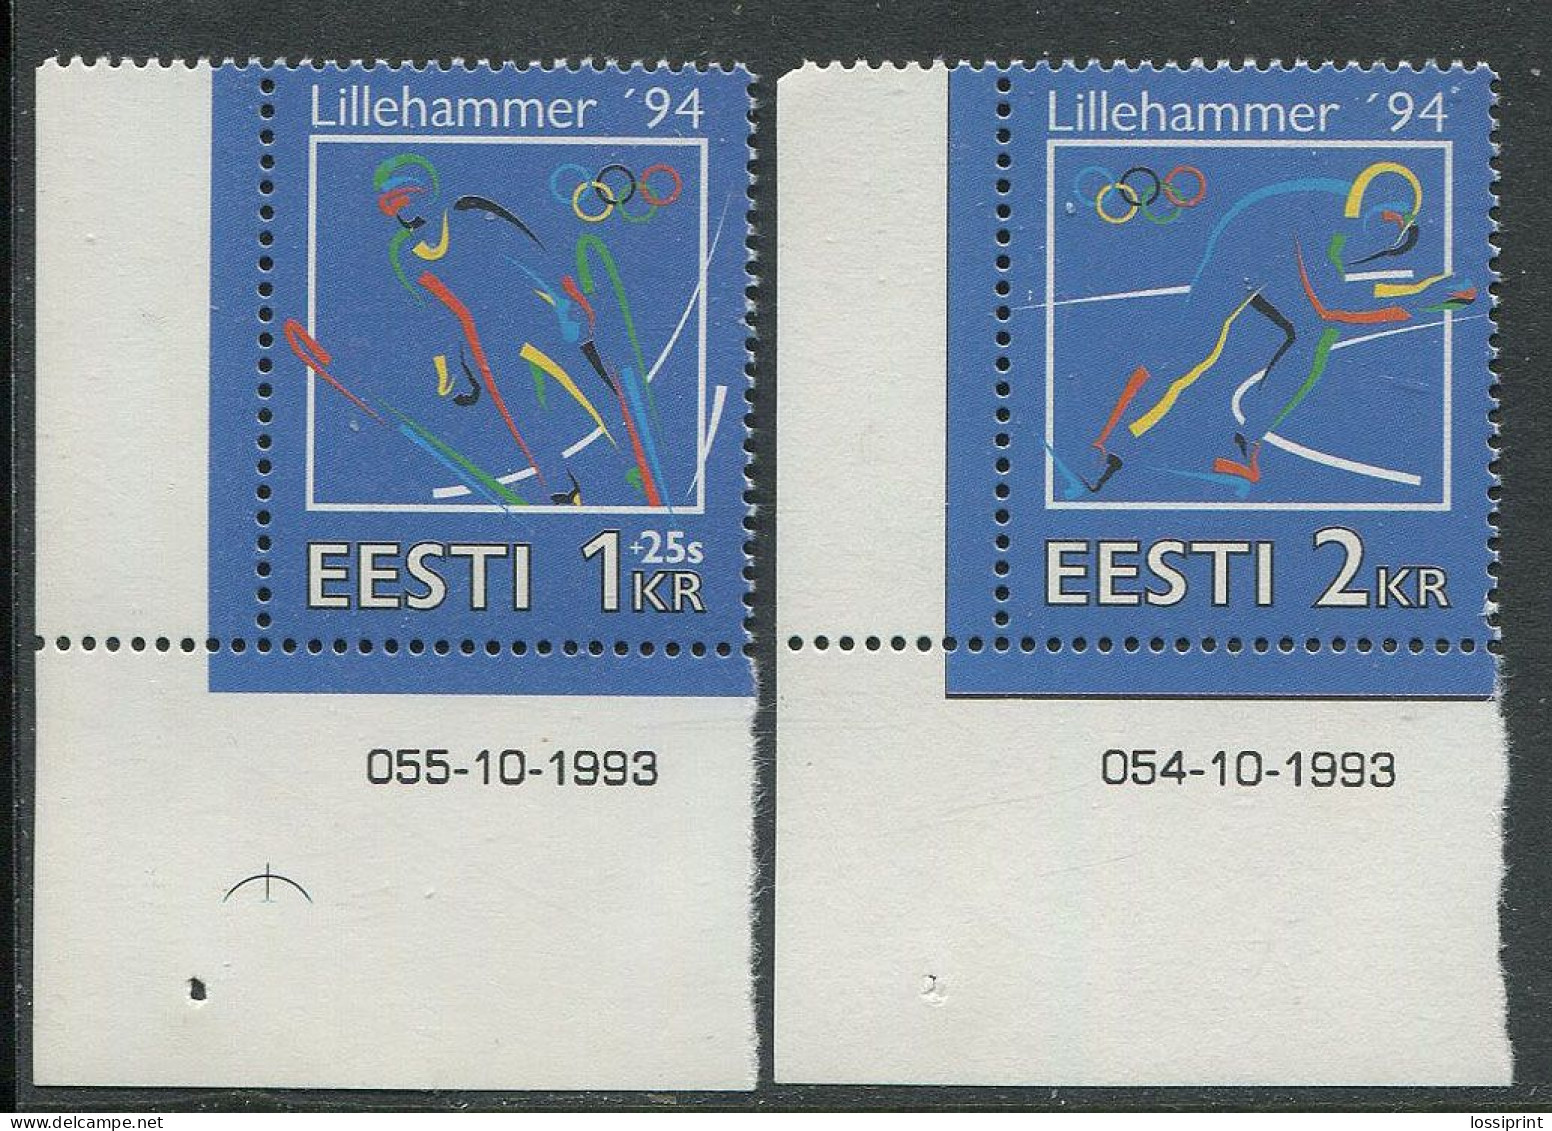 Estonia:Unused Stamps Serie Lillehammer Olympic Games, 1994, MNH, Corners - Hiver 1994: Lillehammer